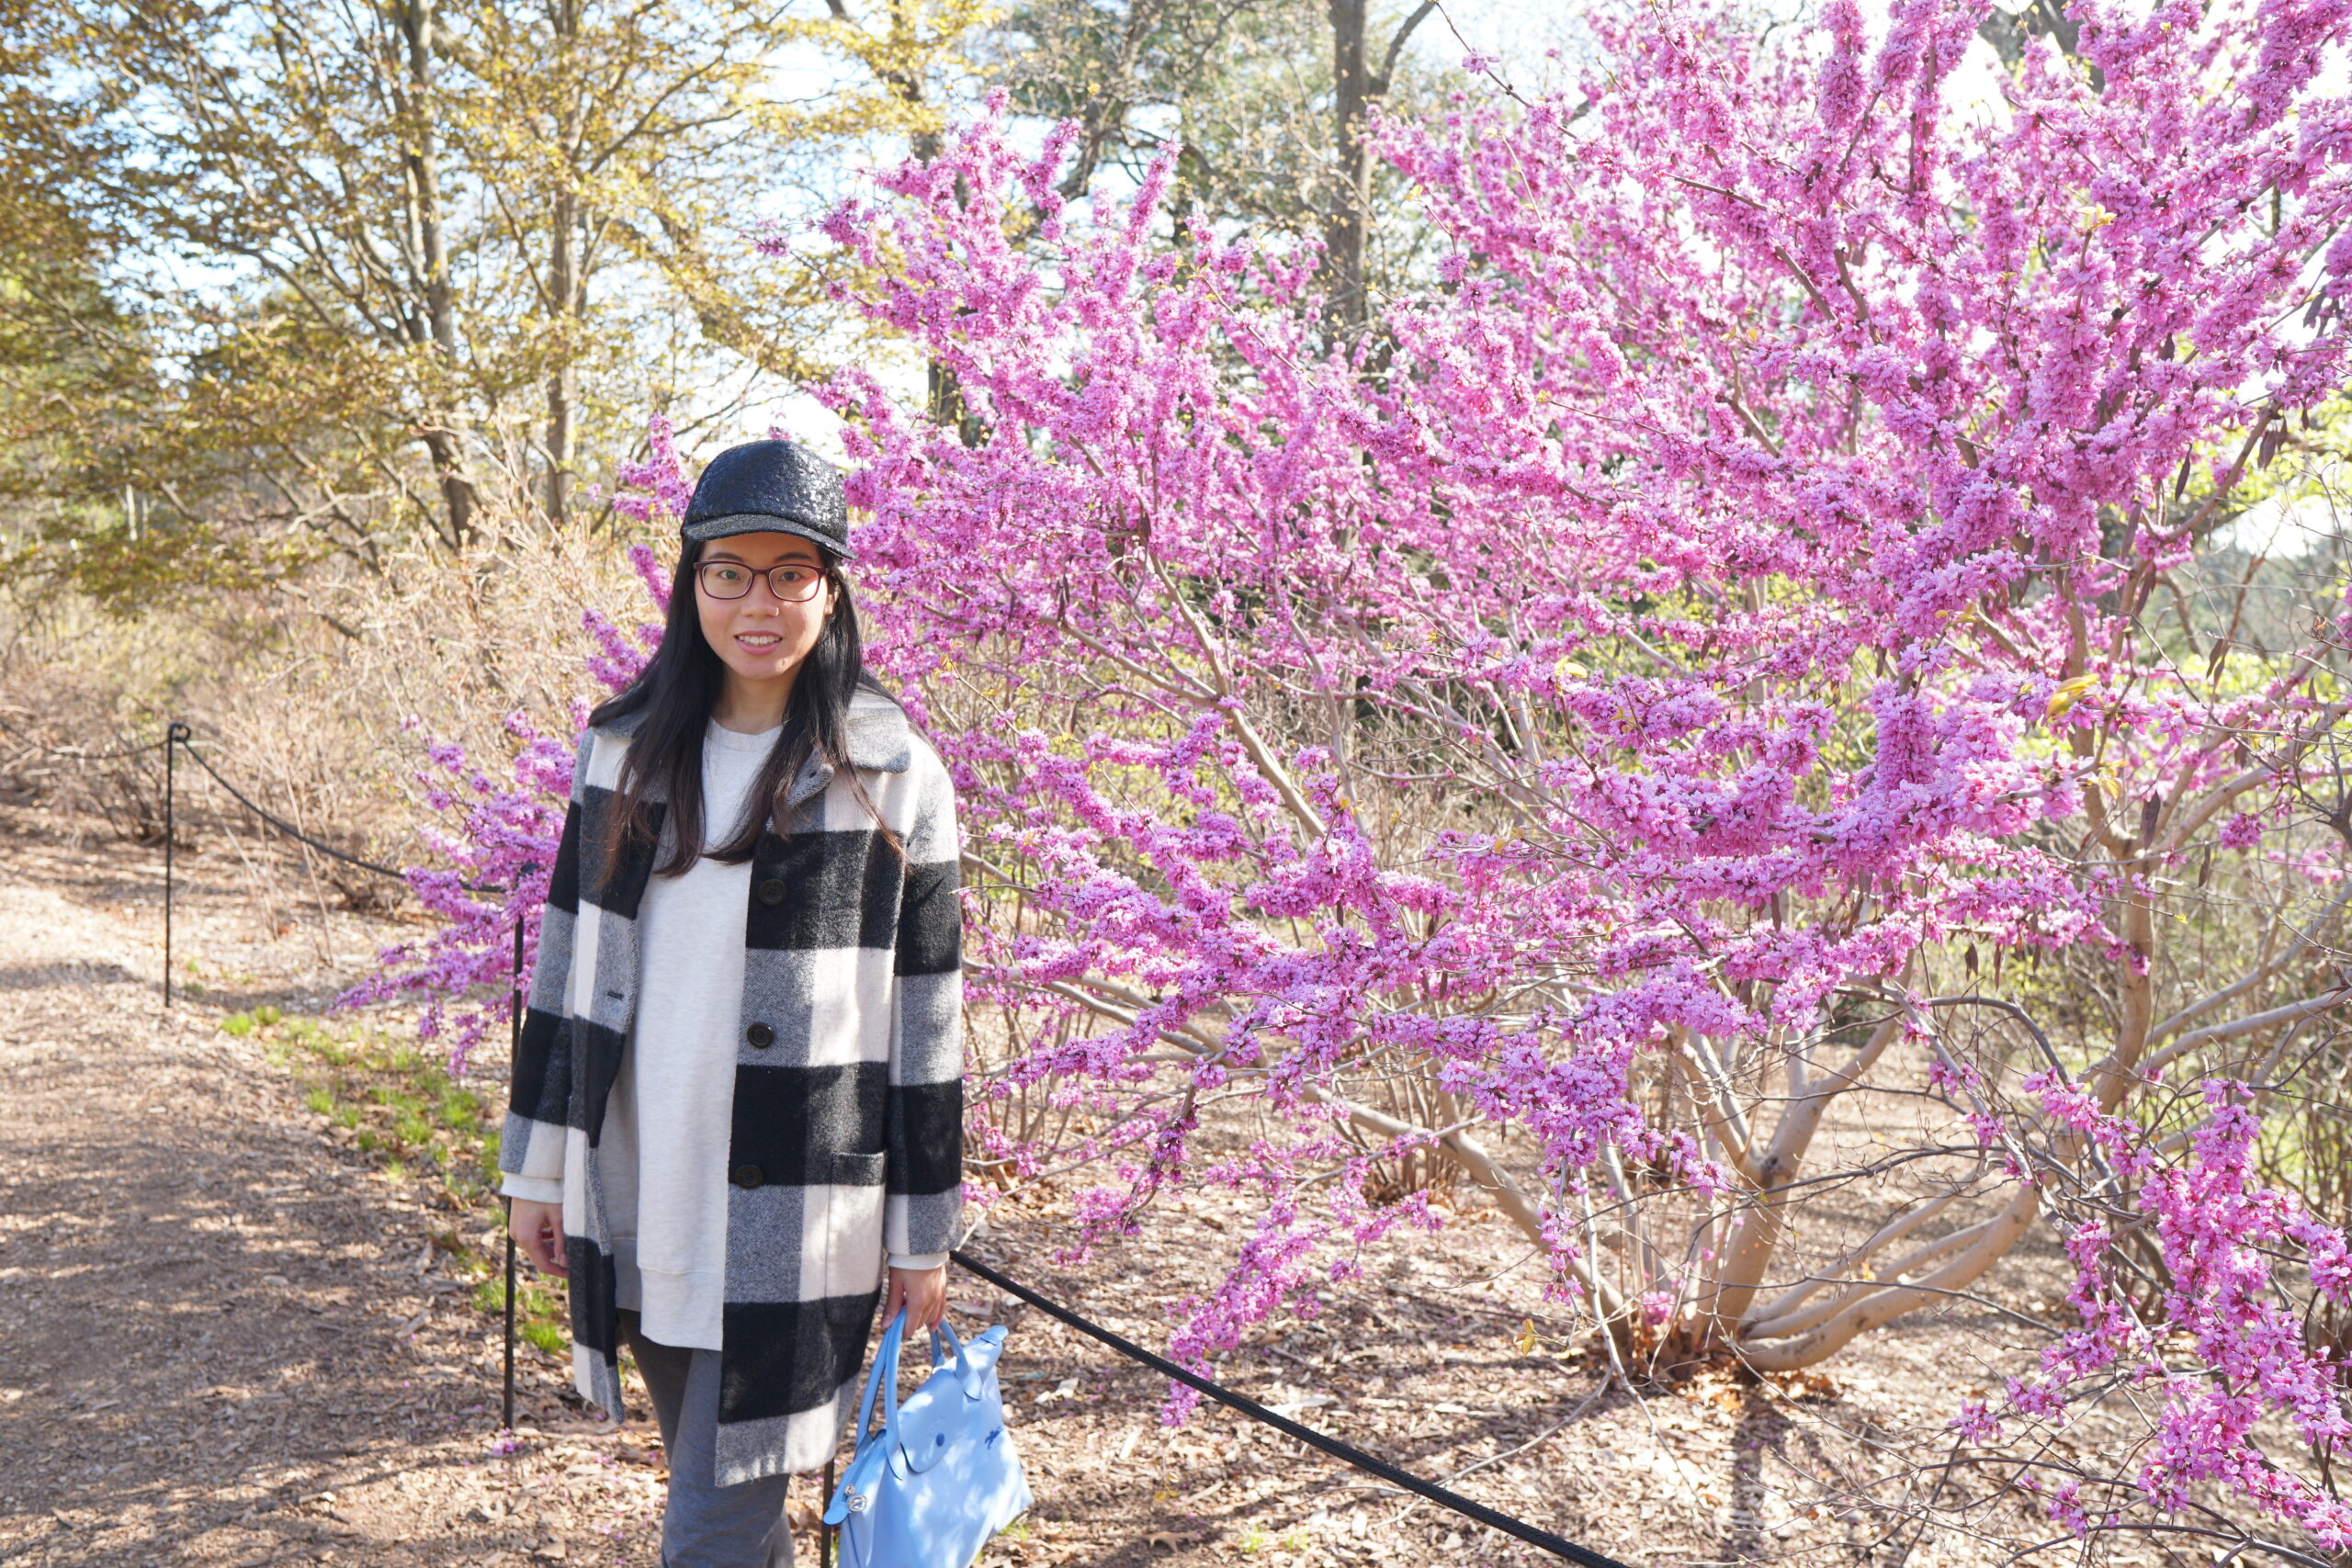 Yaqing Zhang in front of a blooming purple flower tree.